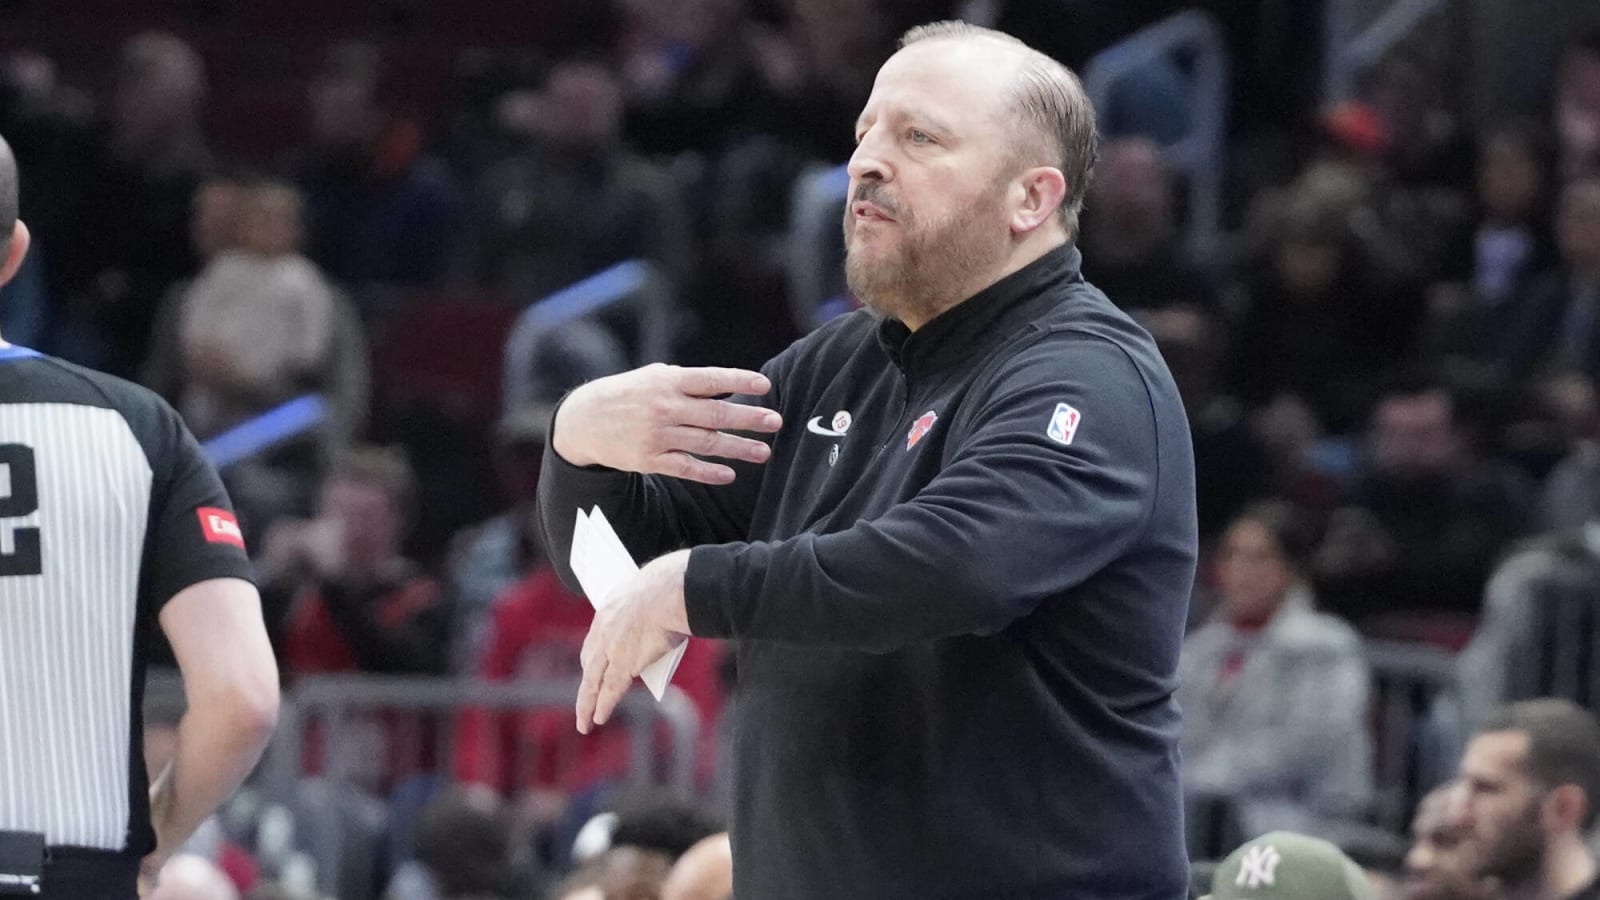 Knicks players incensed over Tom Thibodeau slight in NBA player’s poll